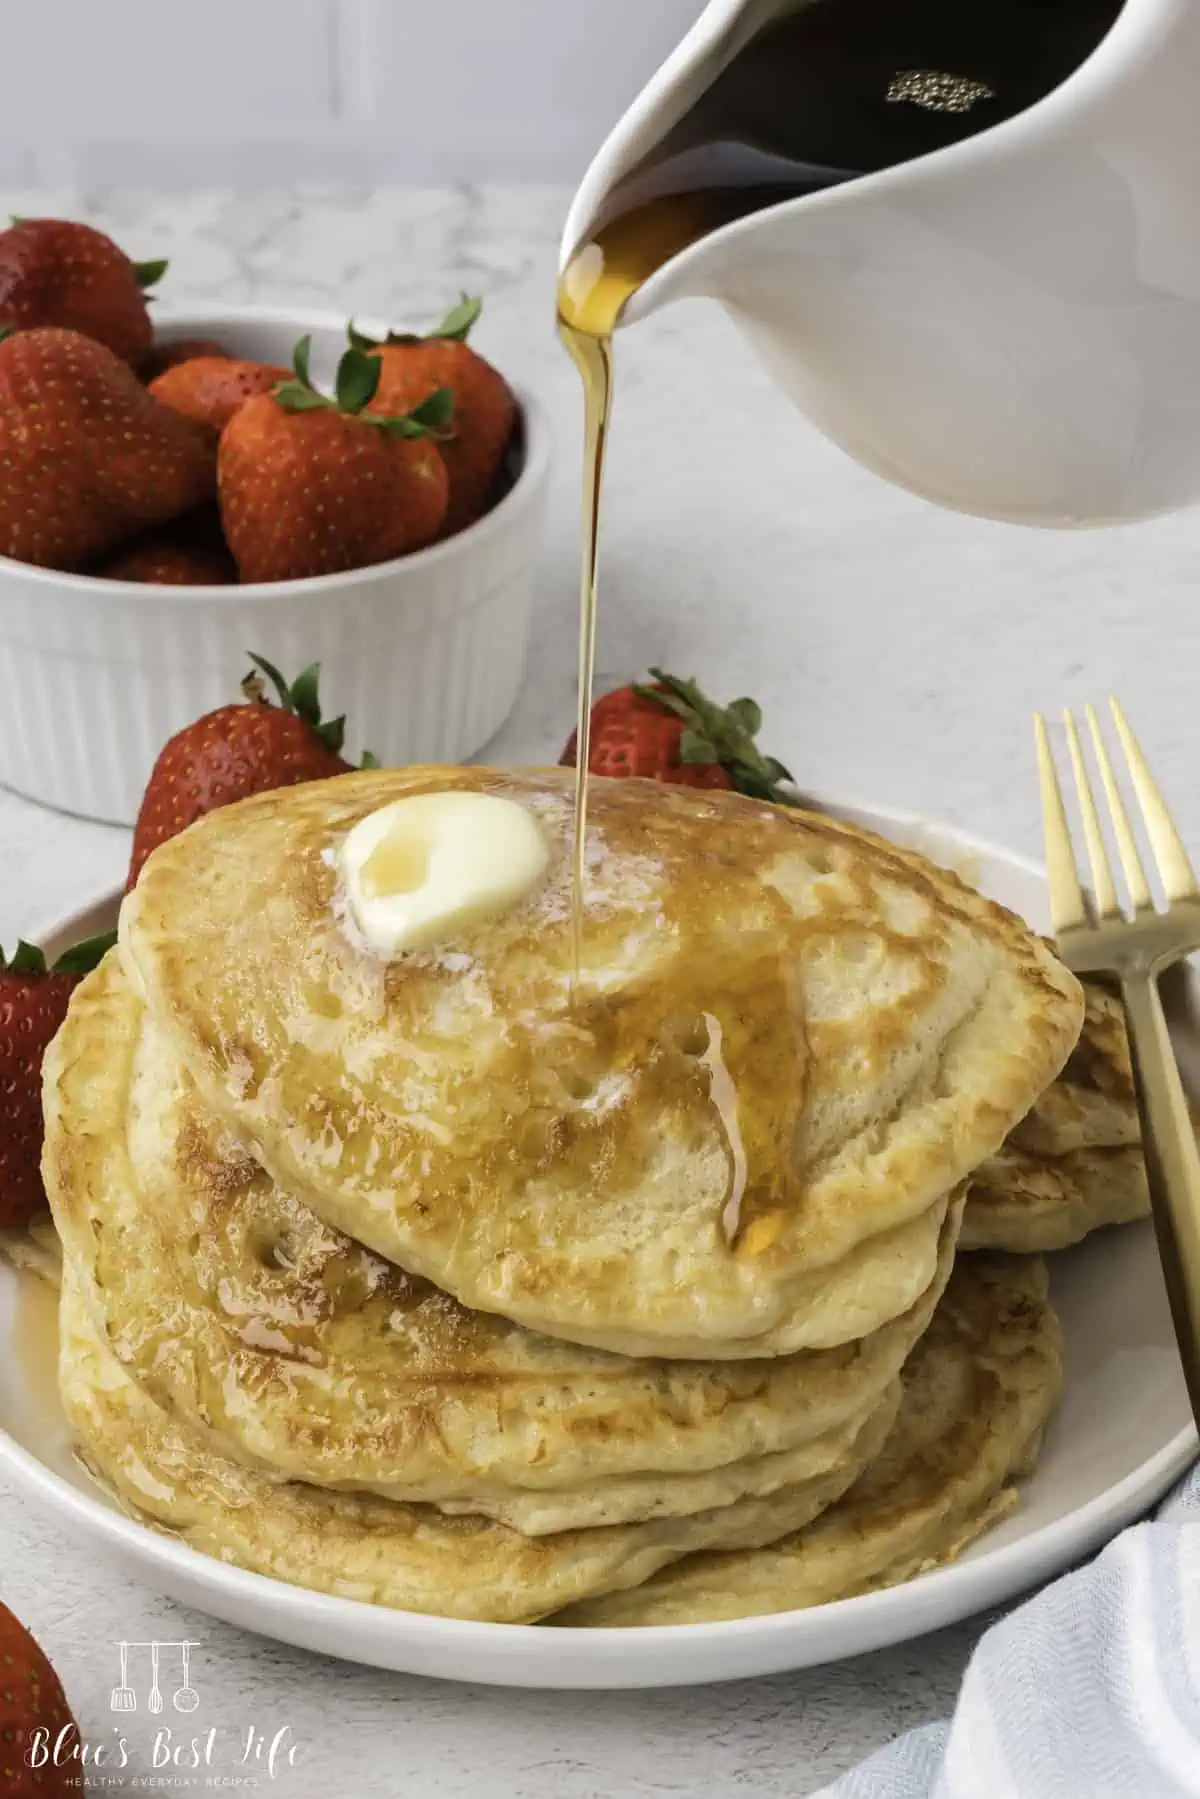 Pouring syrup on cottage cheese pancakes.  